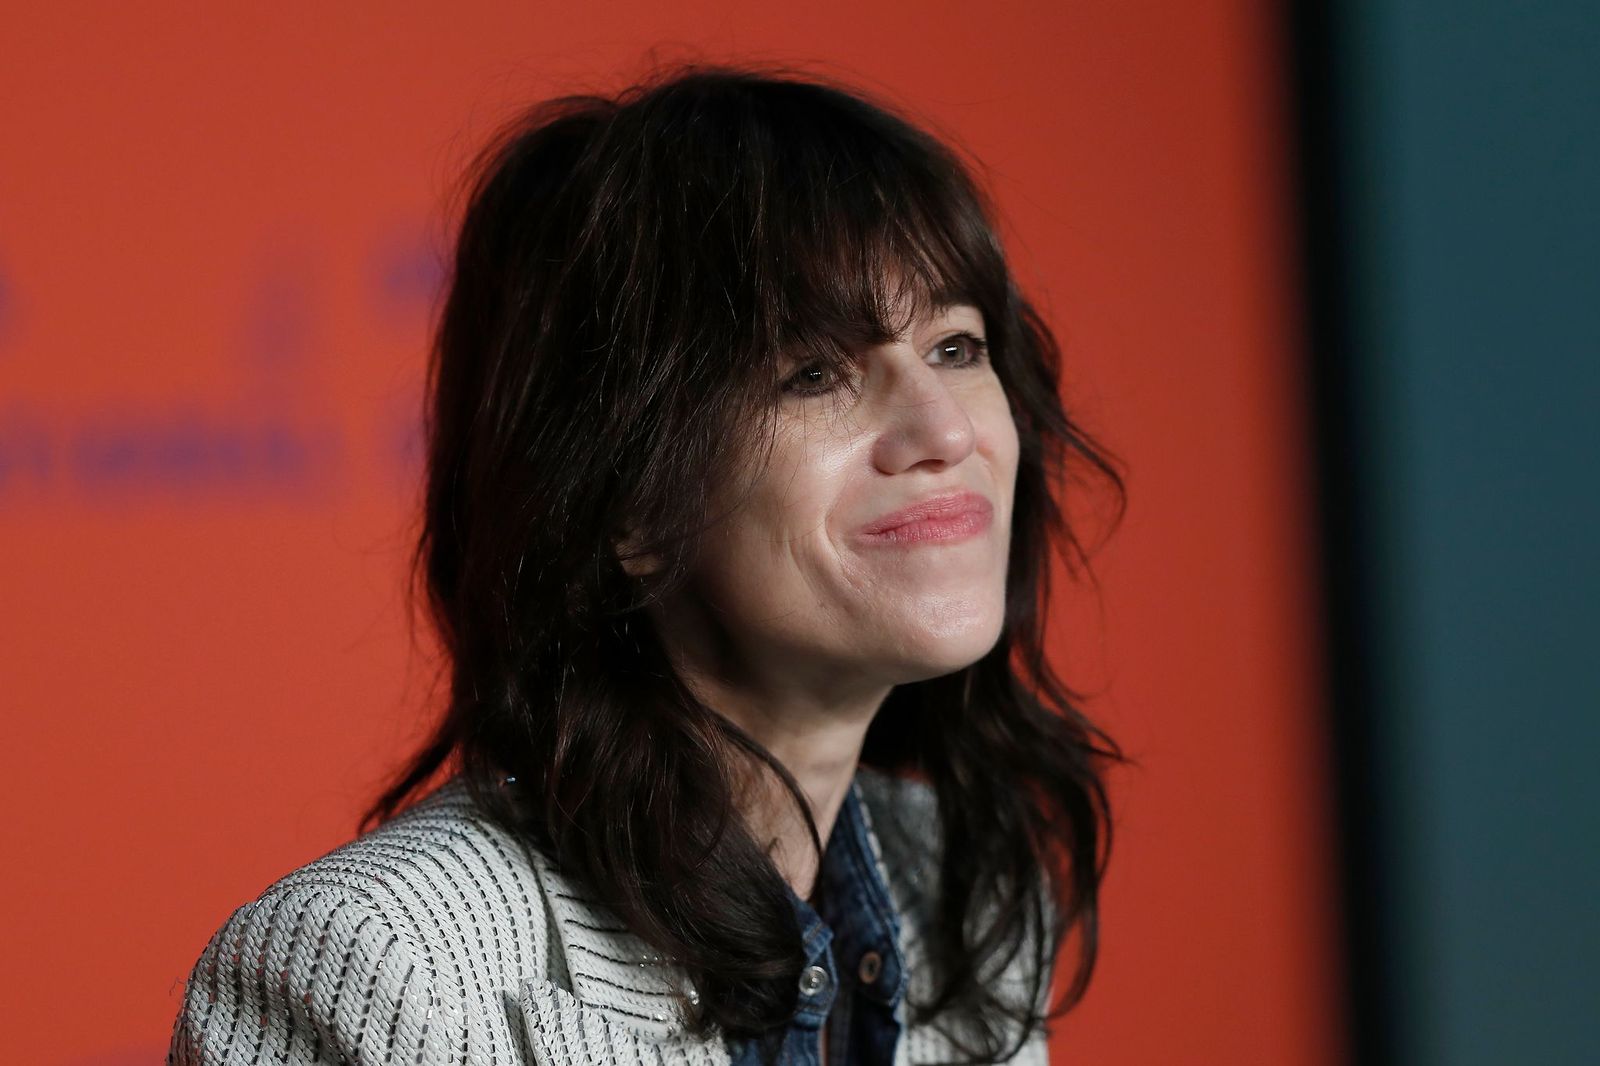 L'actrice Charlotte Gainsbourg | Photo : Getty Images